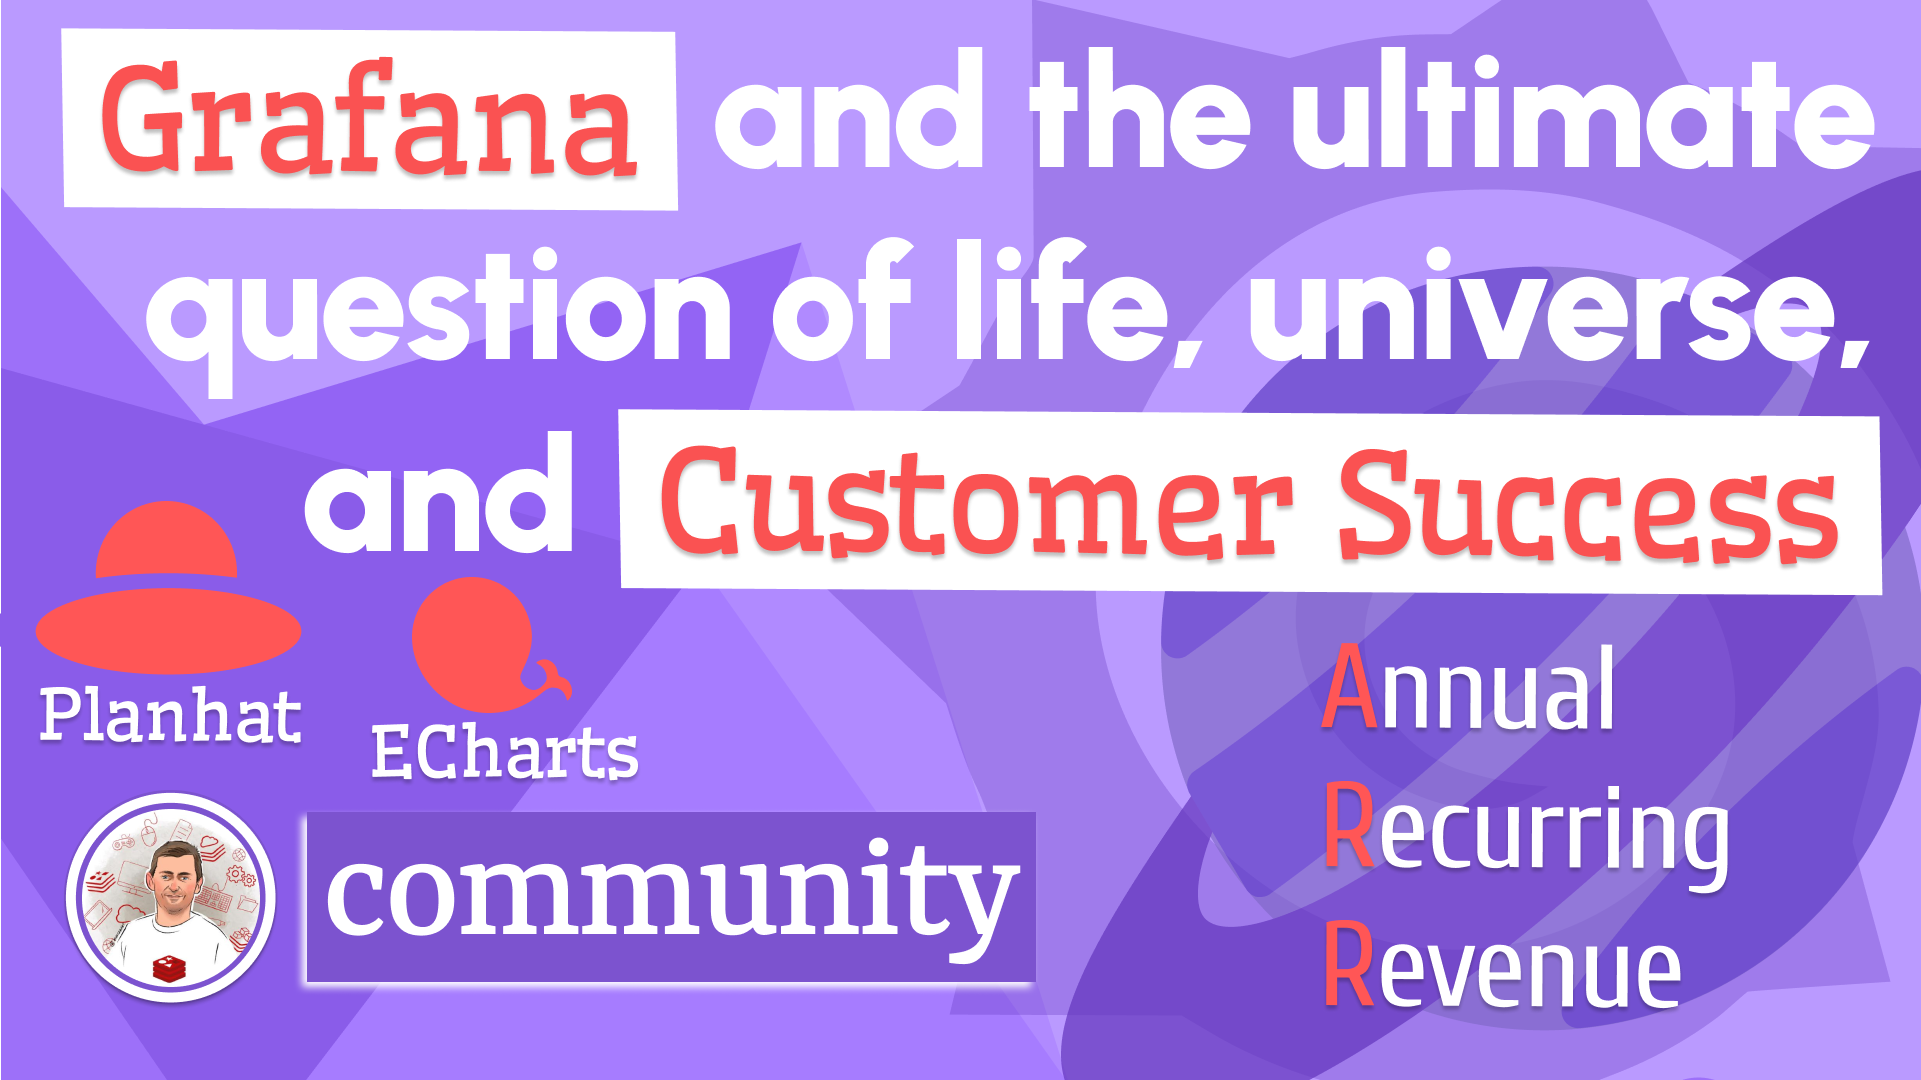 Grafana and the ultimate question of life, universe, and Customer Success